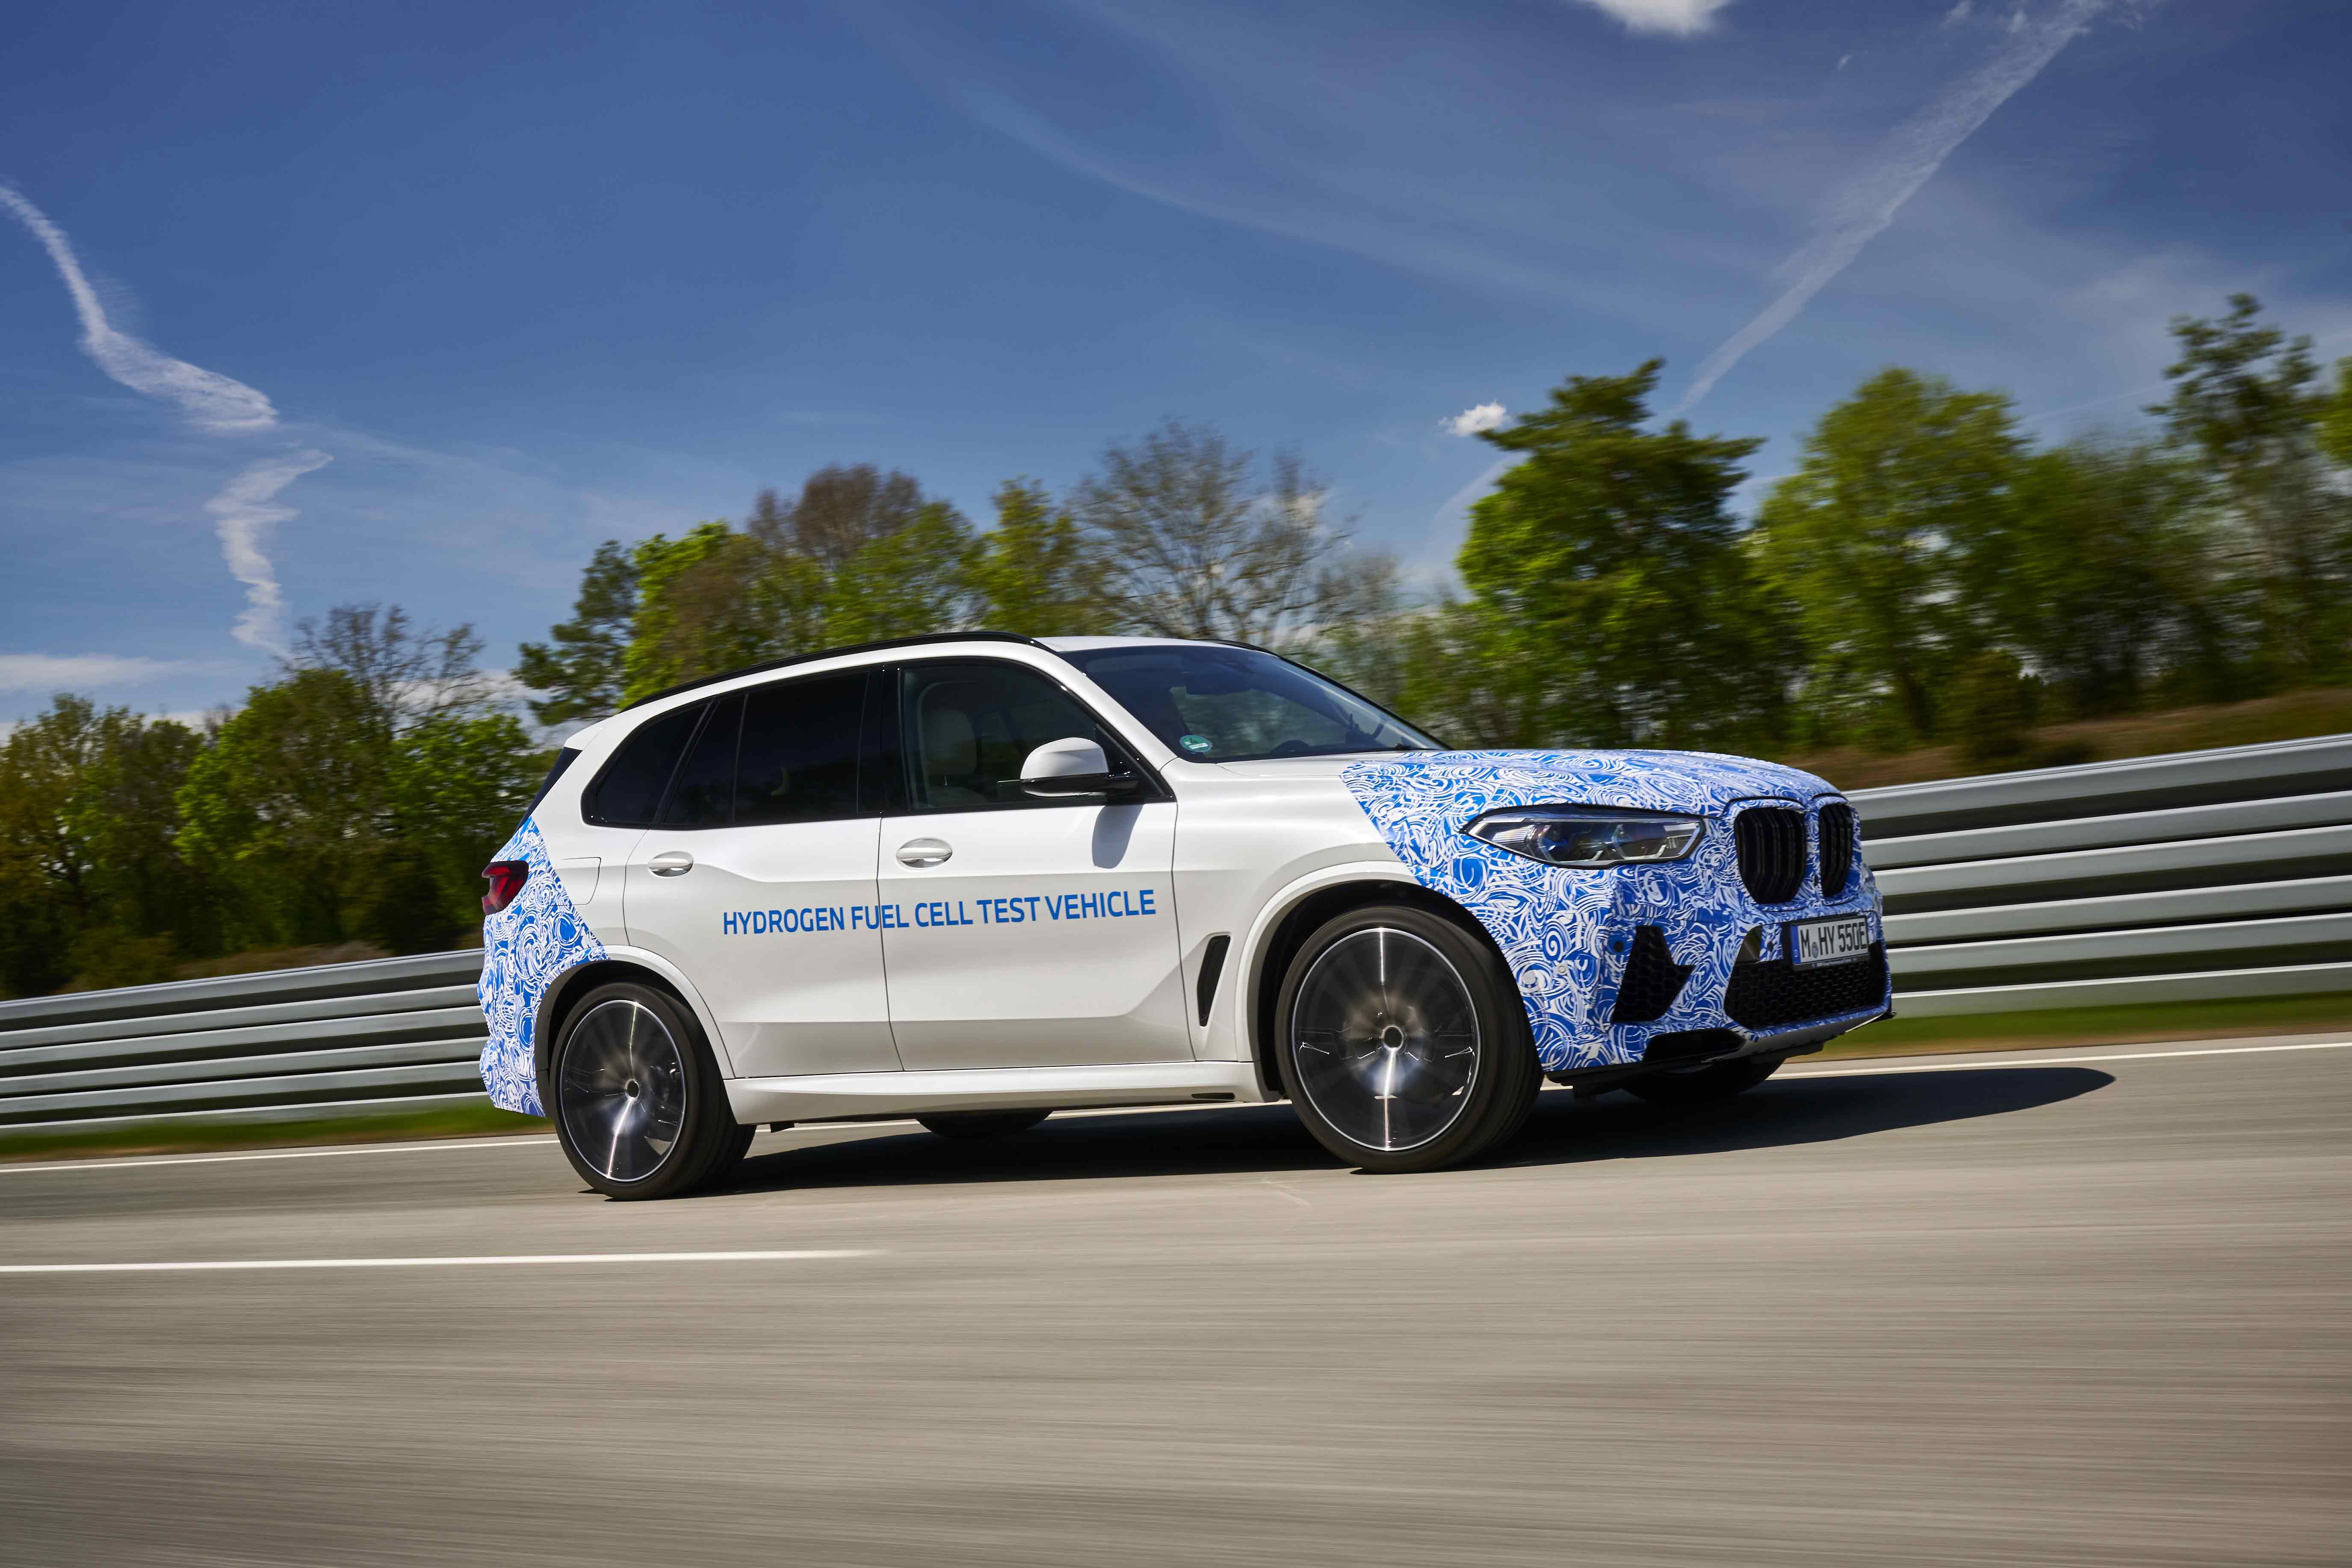 Everyday testing of BMW i Hydrogen NEXT with hydrogen fuel cell drive train begins